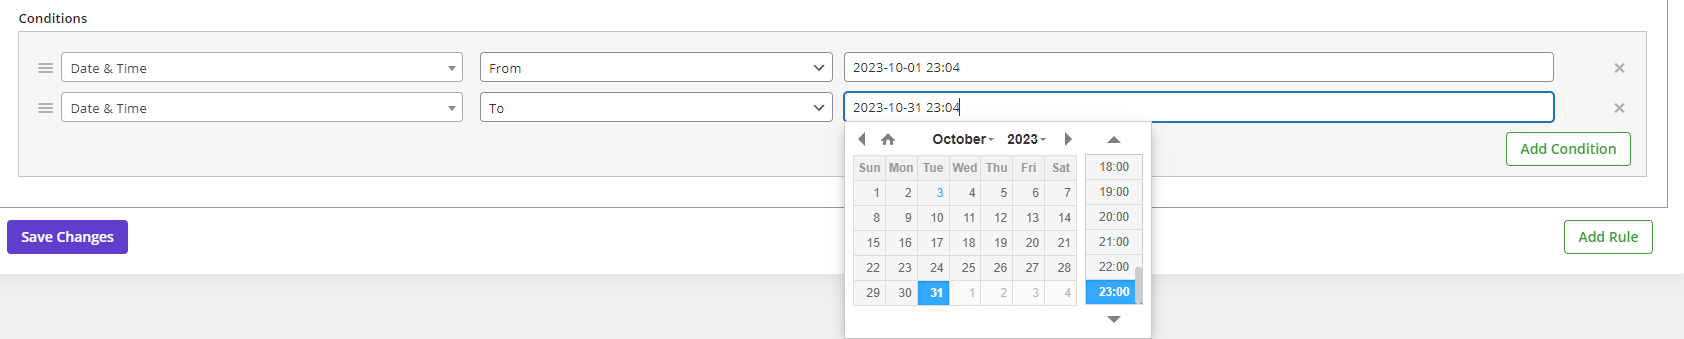 set date range for date and time conditions